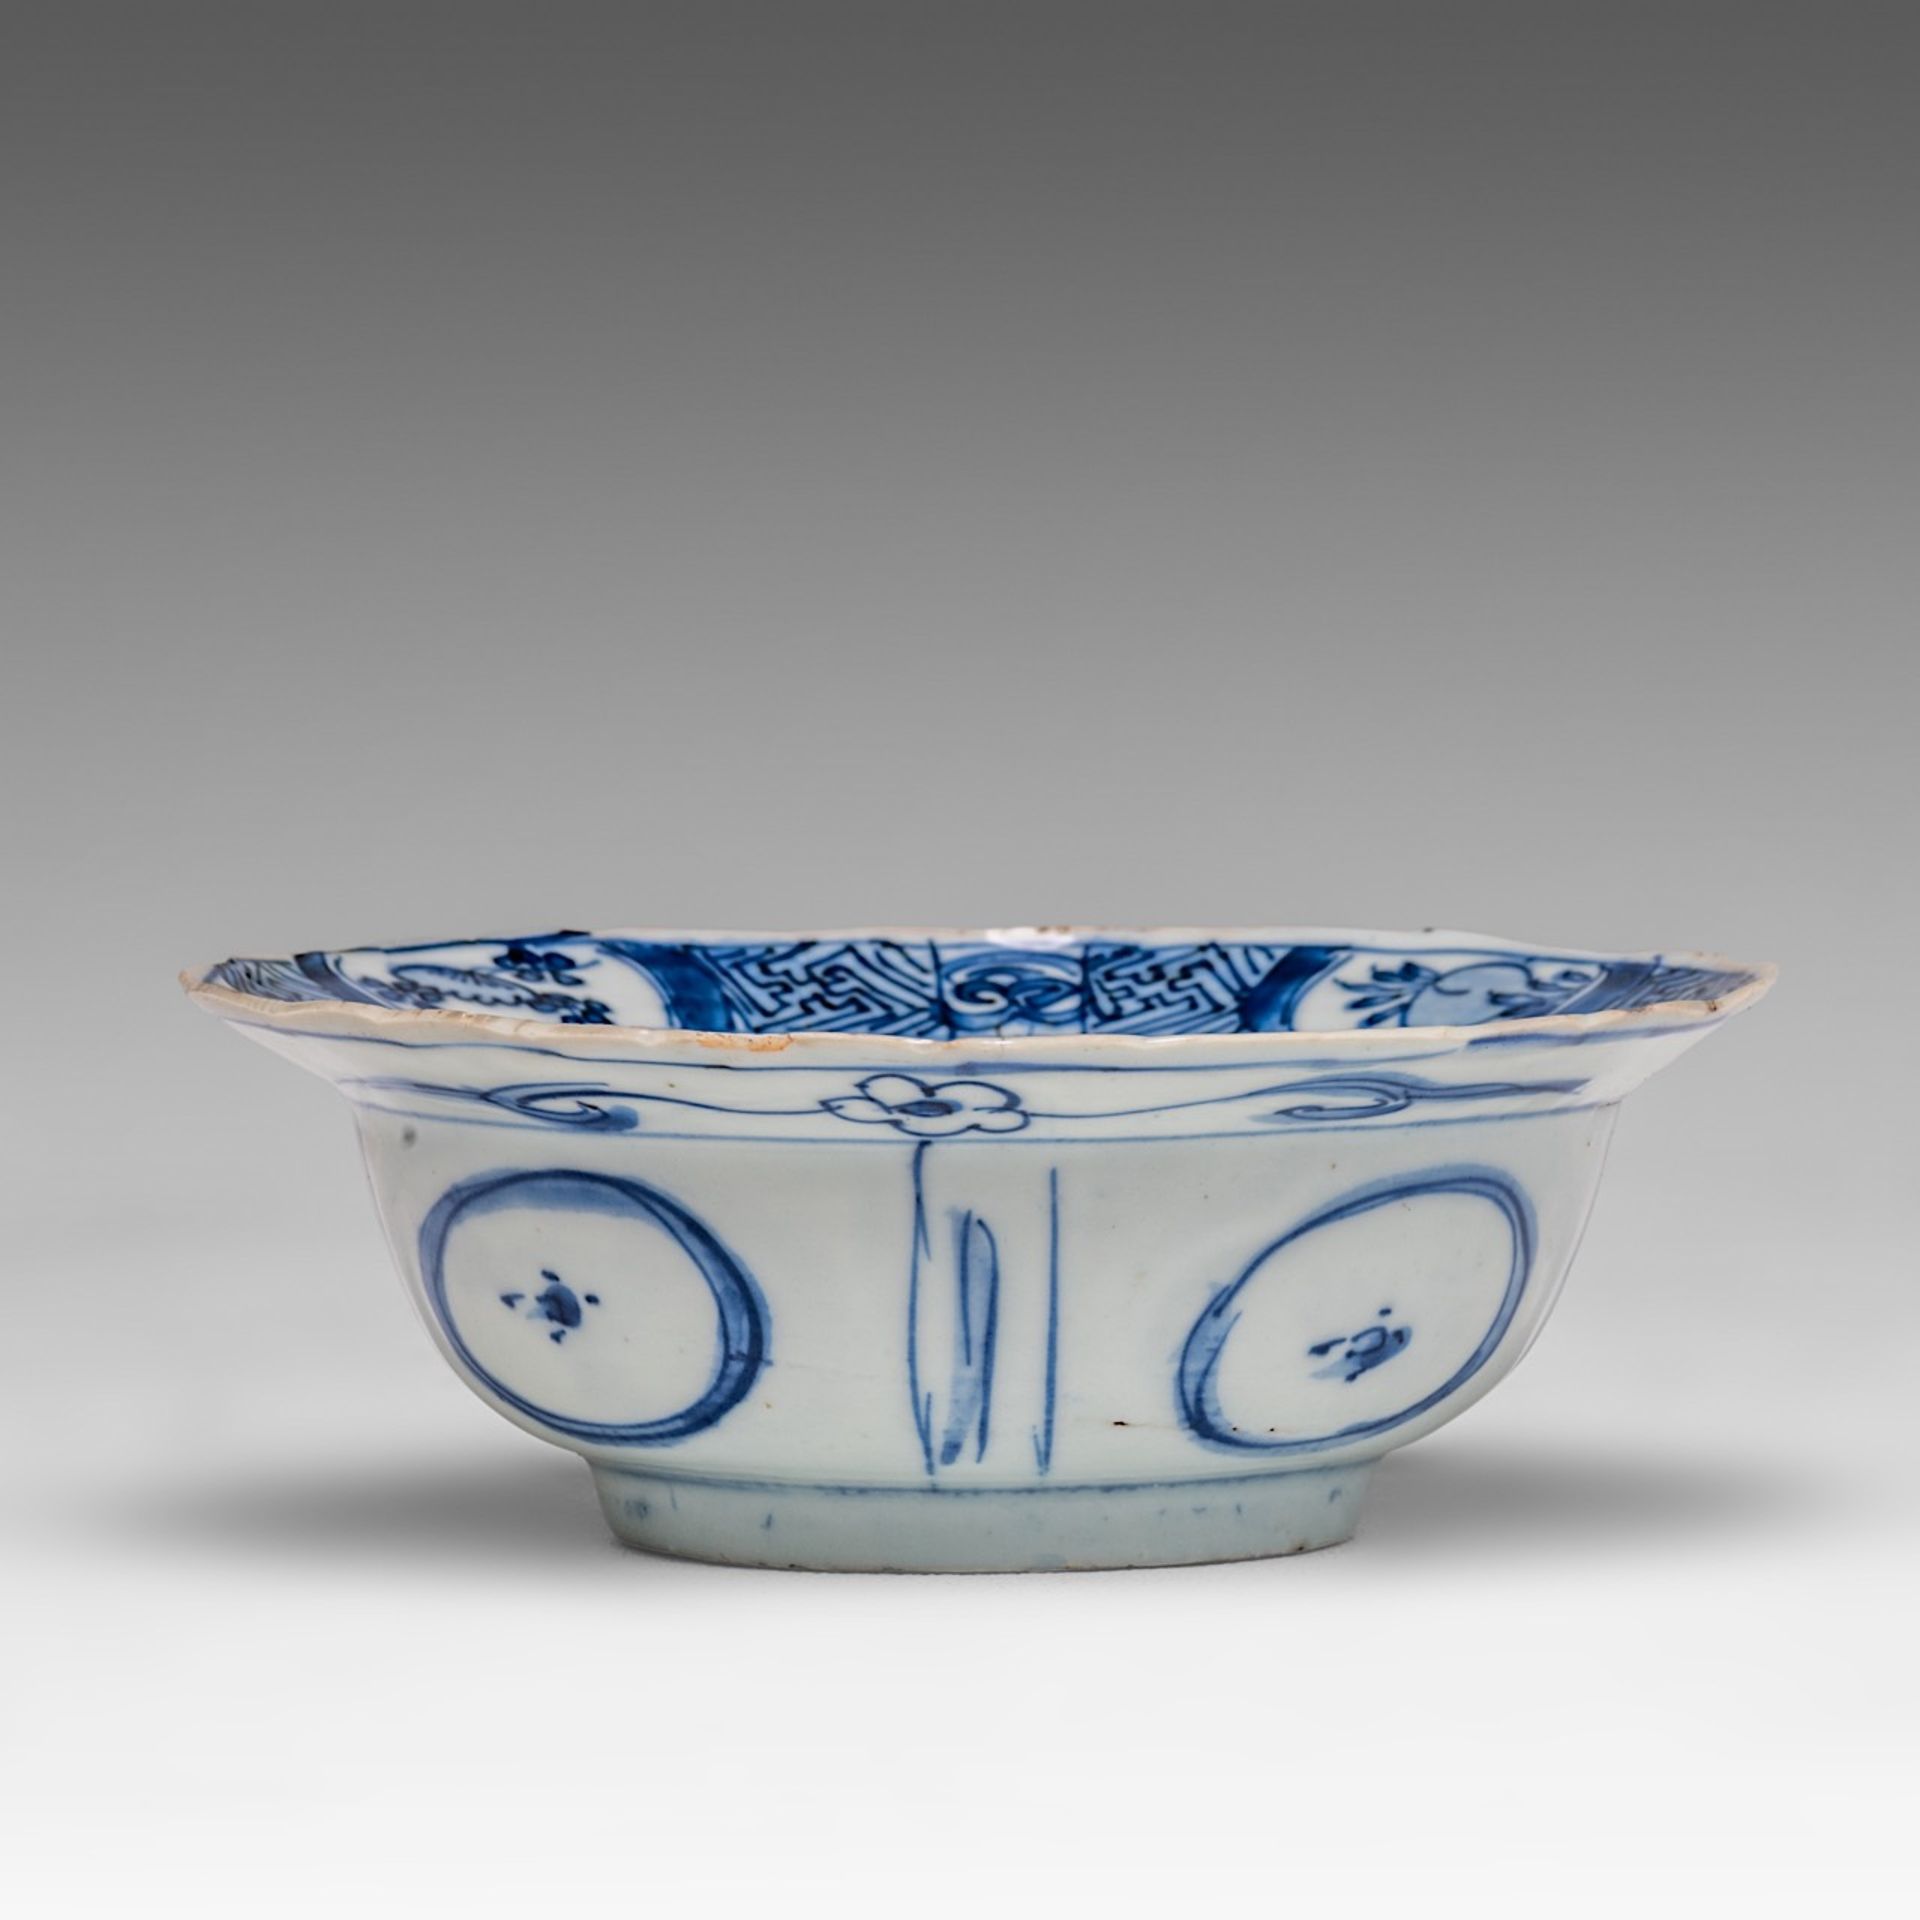 A Chinese kraak blue and white klapmuts bowl, Ming, Wanli period, dia 14,6 - H 5 cm - Image 7 of 7